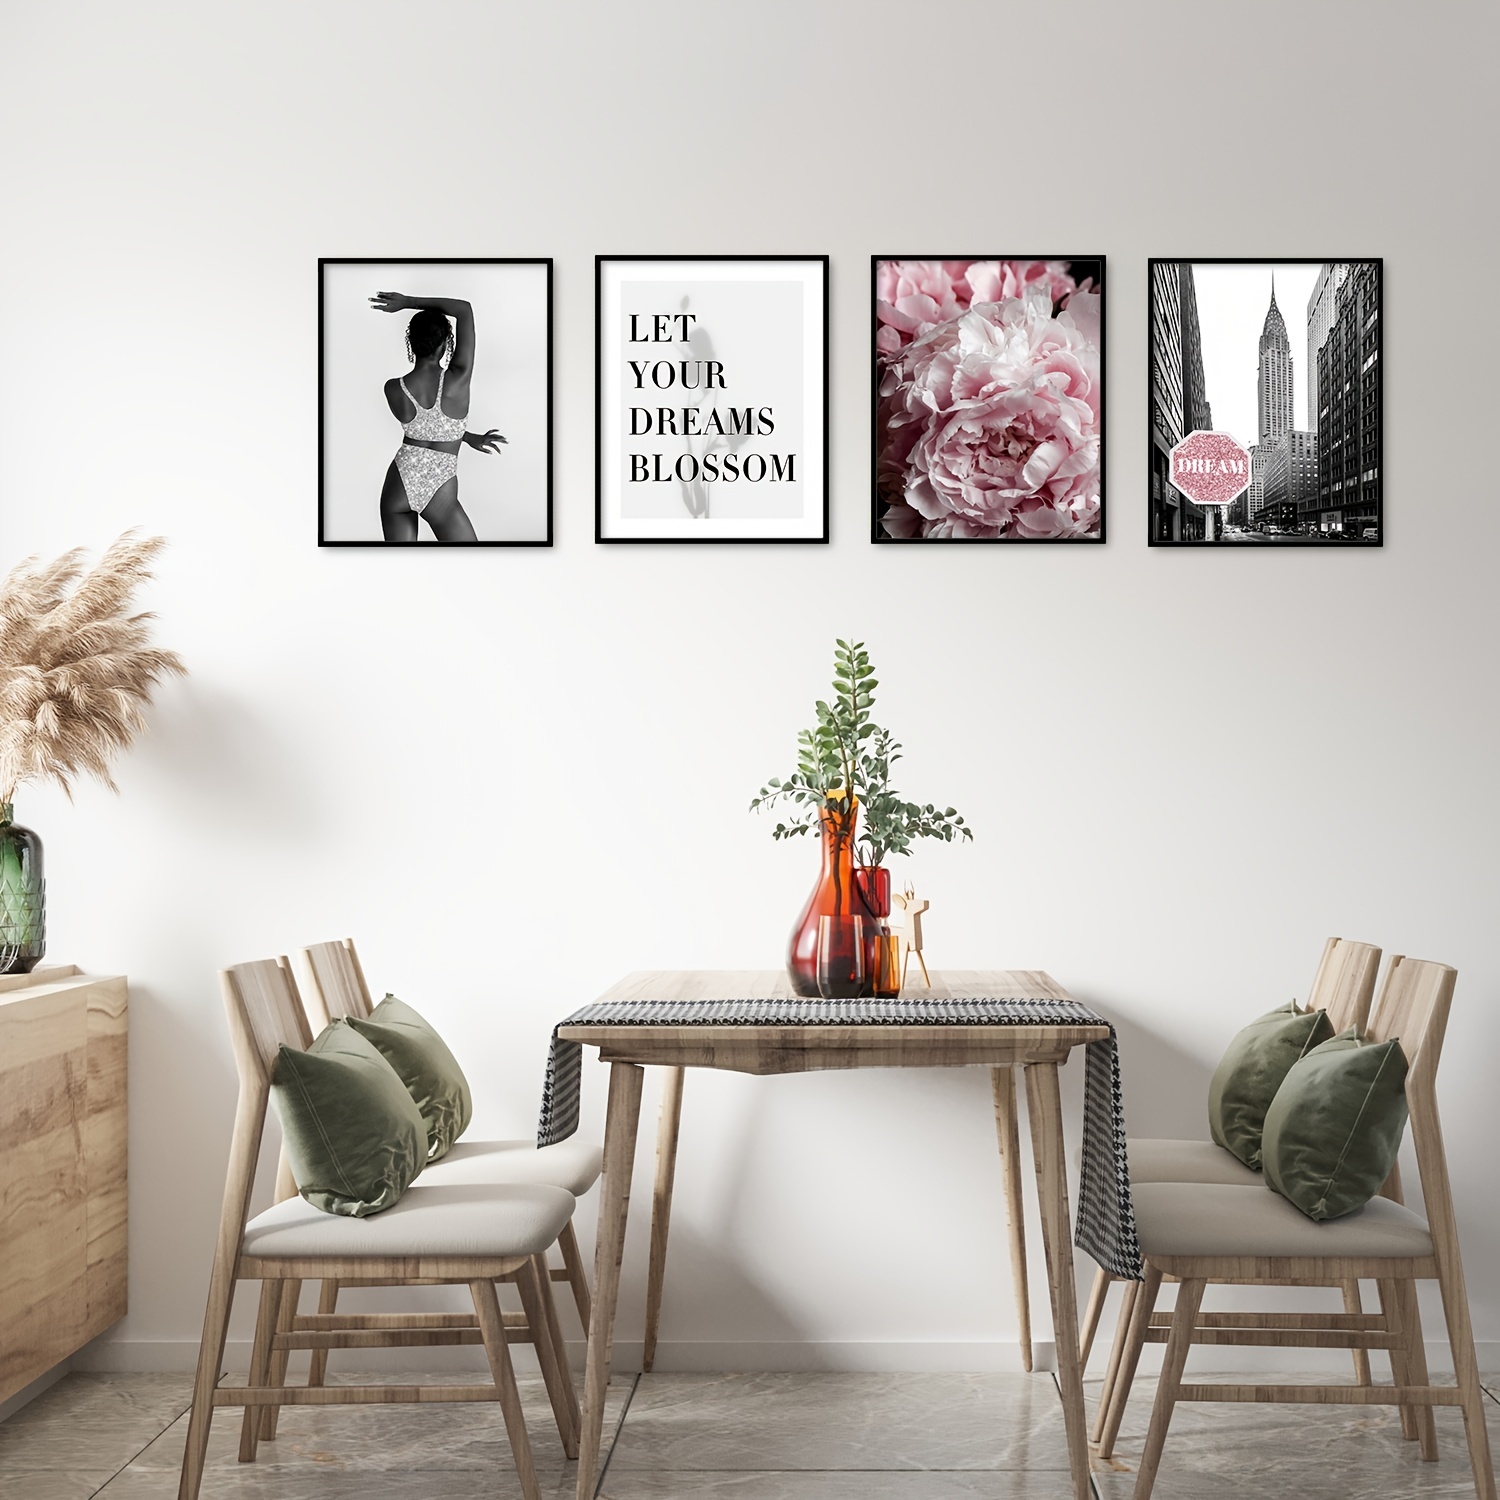 6pcs Set Glam Fashion Canvas Wall Art Vintage Posters And Prints For  Bedroom Wall Art Black And White Prints Flower Women Body Aesthetic  Pictures For Bedroom Walls 8x10 Inches No Frame 